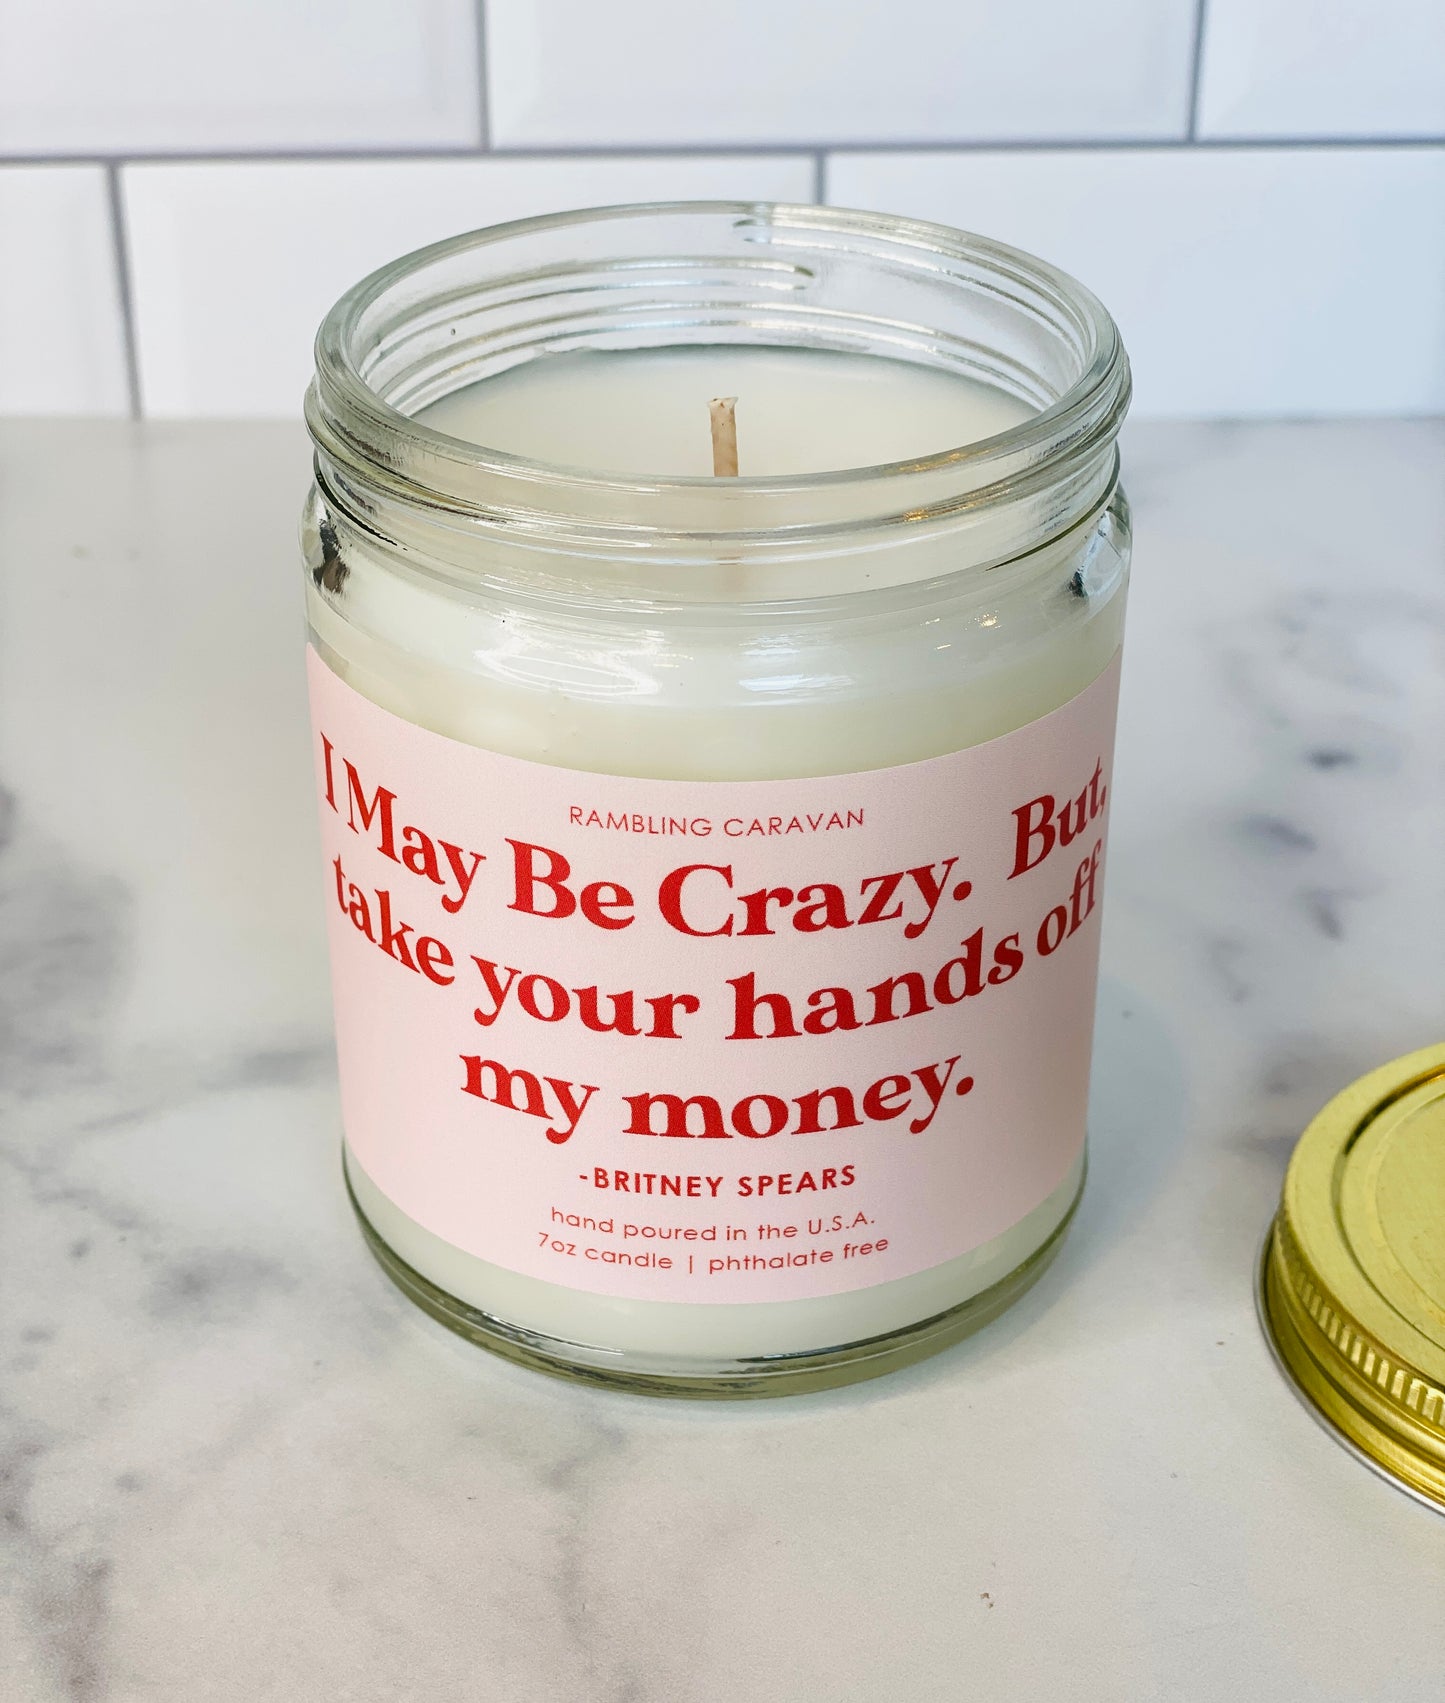 I May Be Crazy. But, take your hands off my money Candle